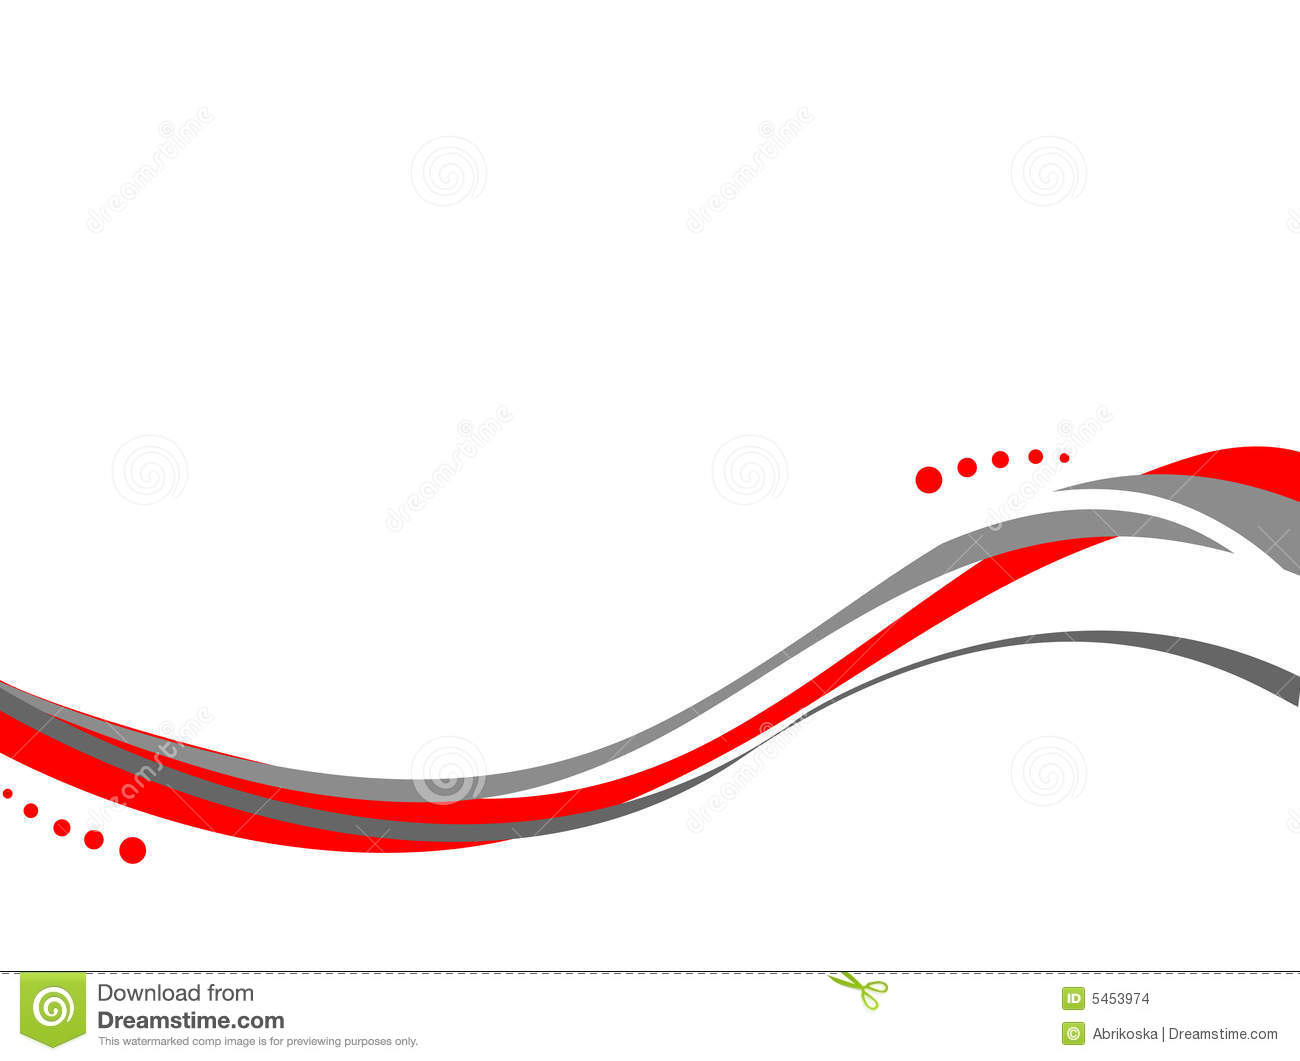 Wavy Abstract Line Stock Images   Image  5453974